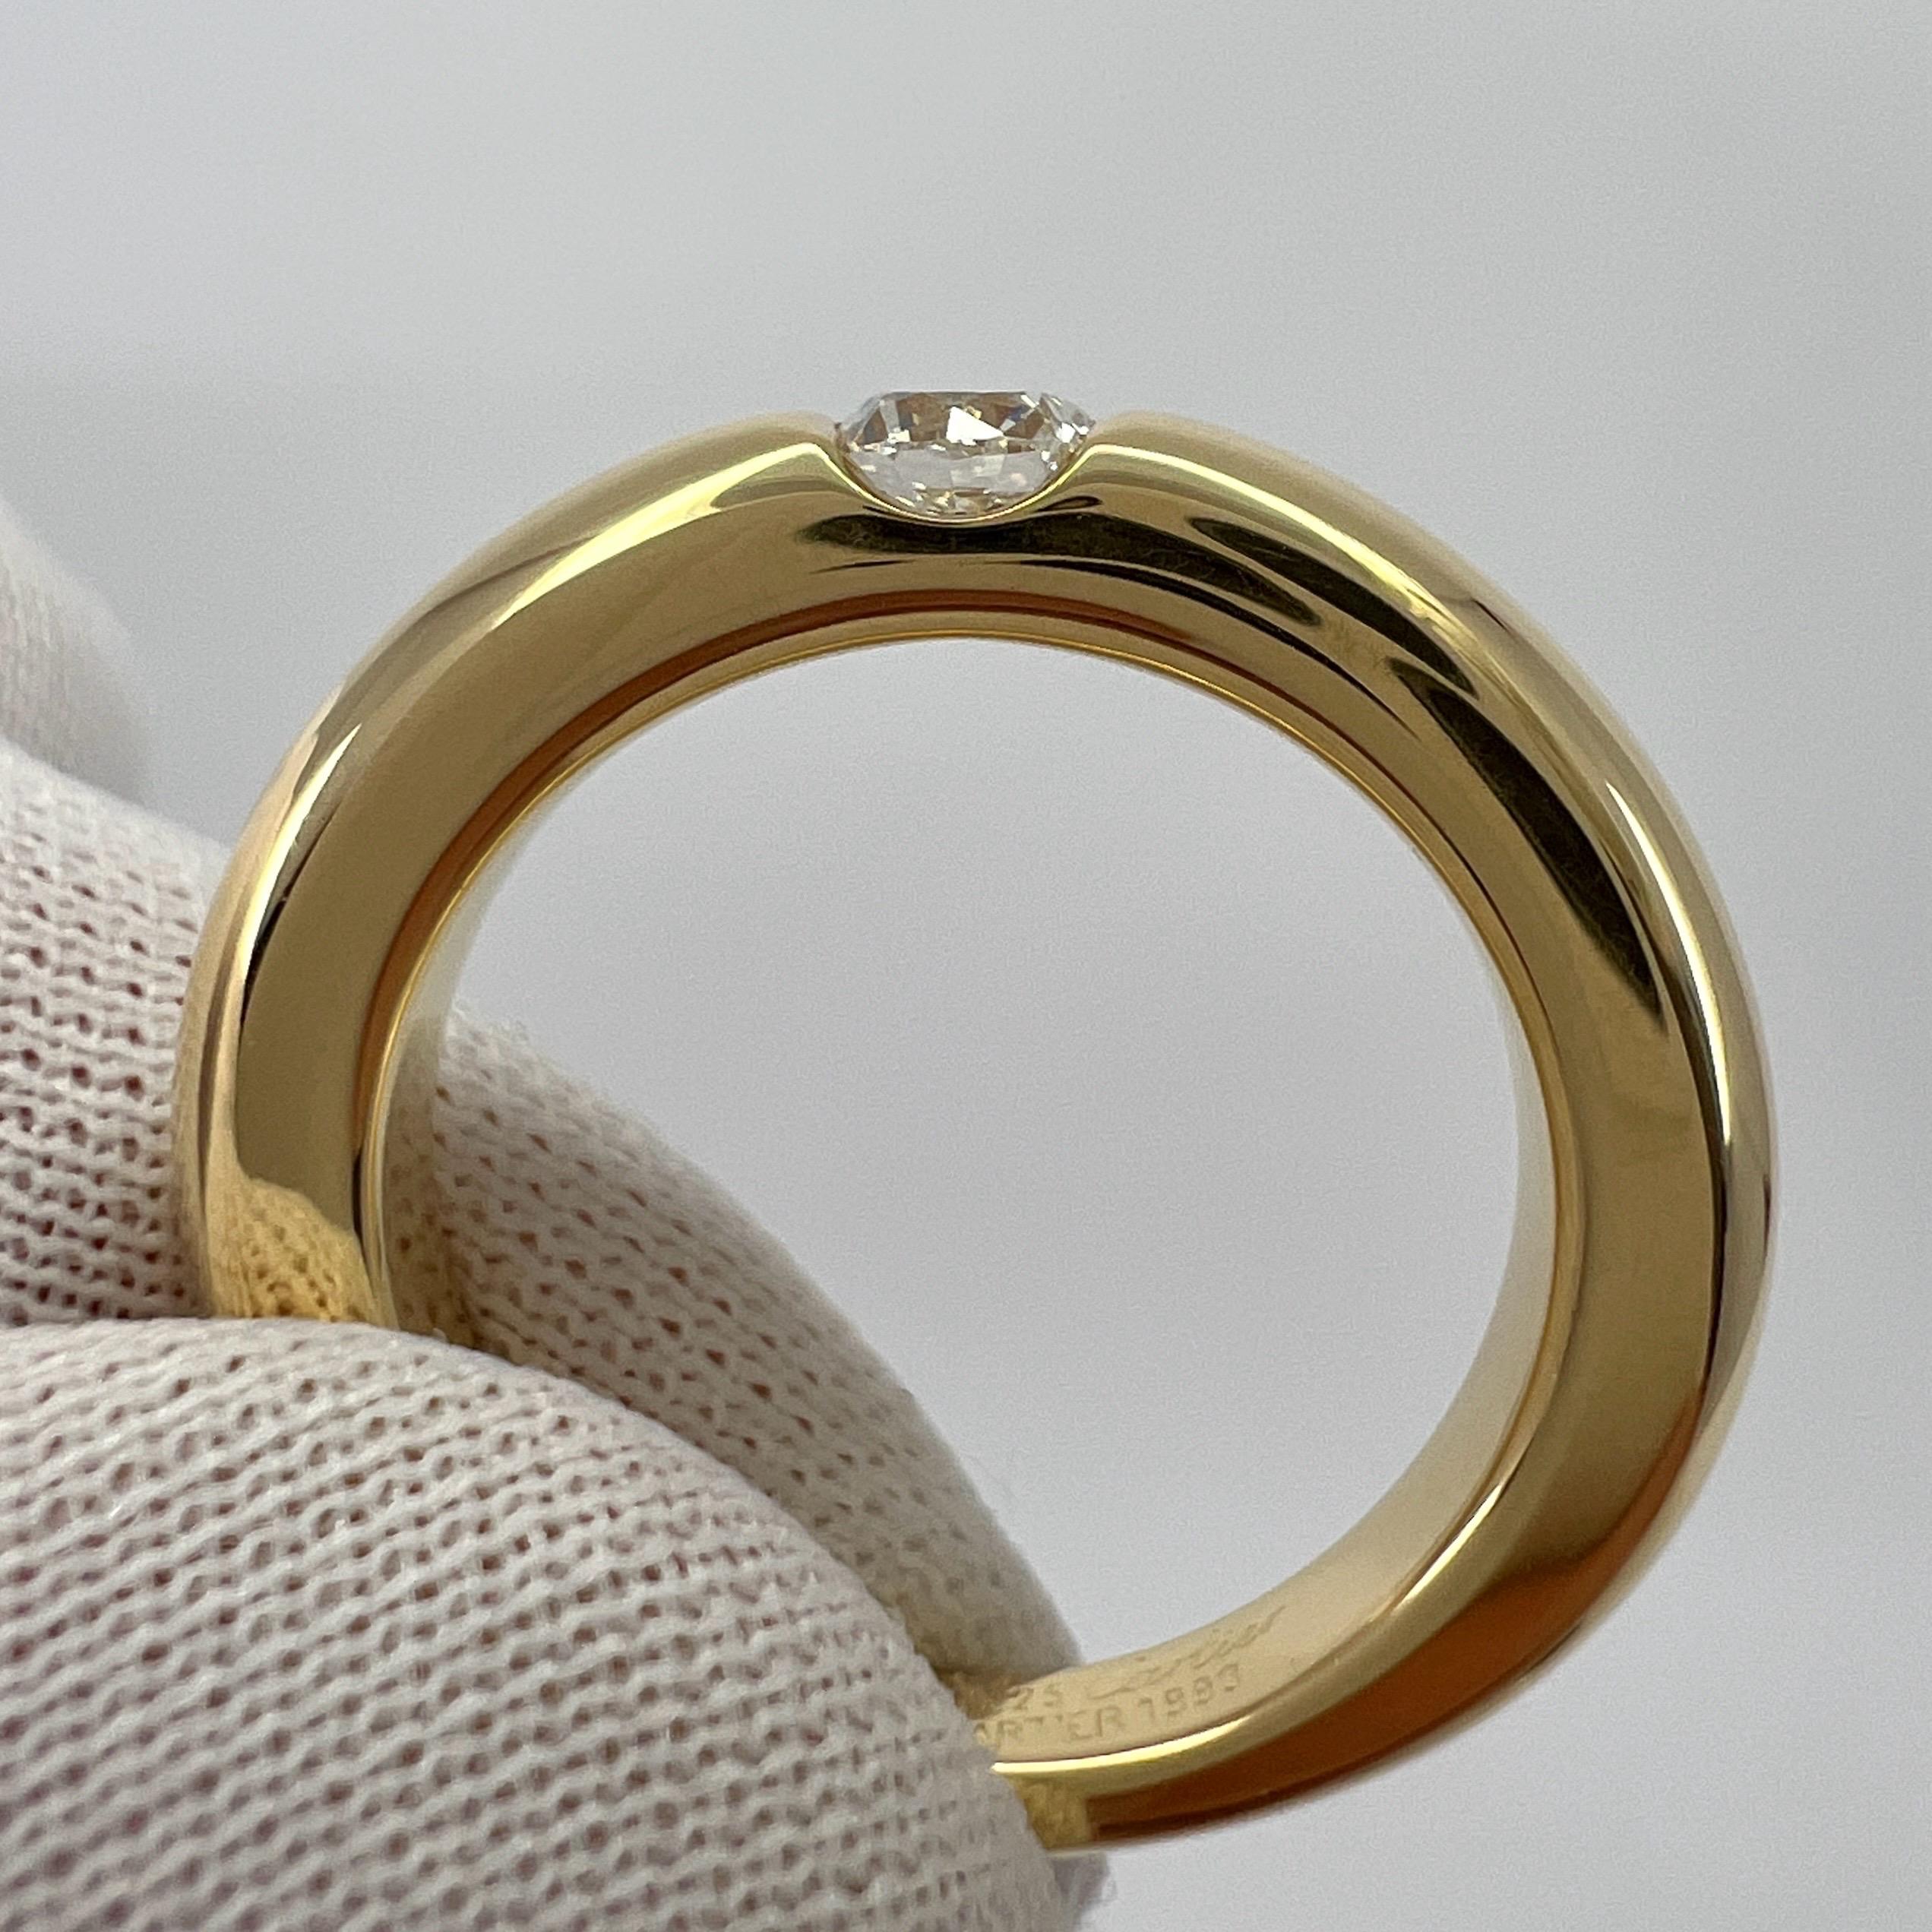 Vintage Cartier Round Diamond Ellipse 18k Yellow Gold Solitaire Band Ring US5 49 For Sale 1